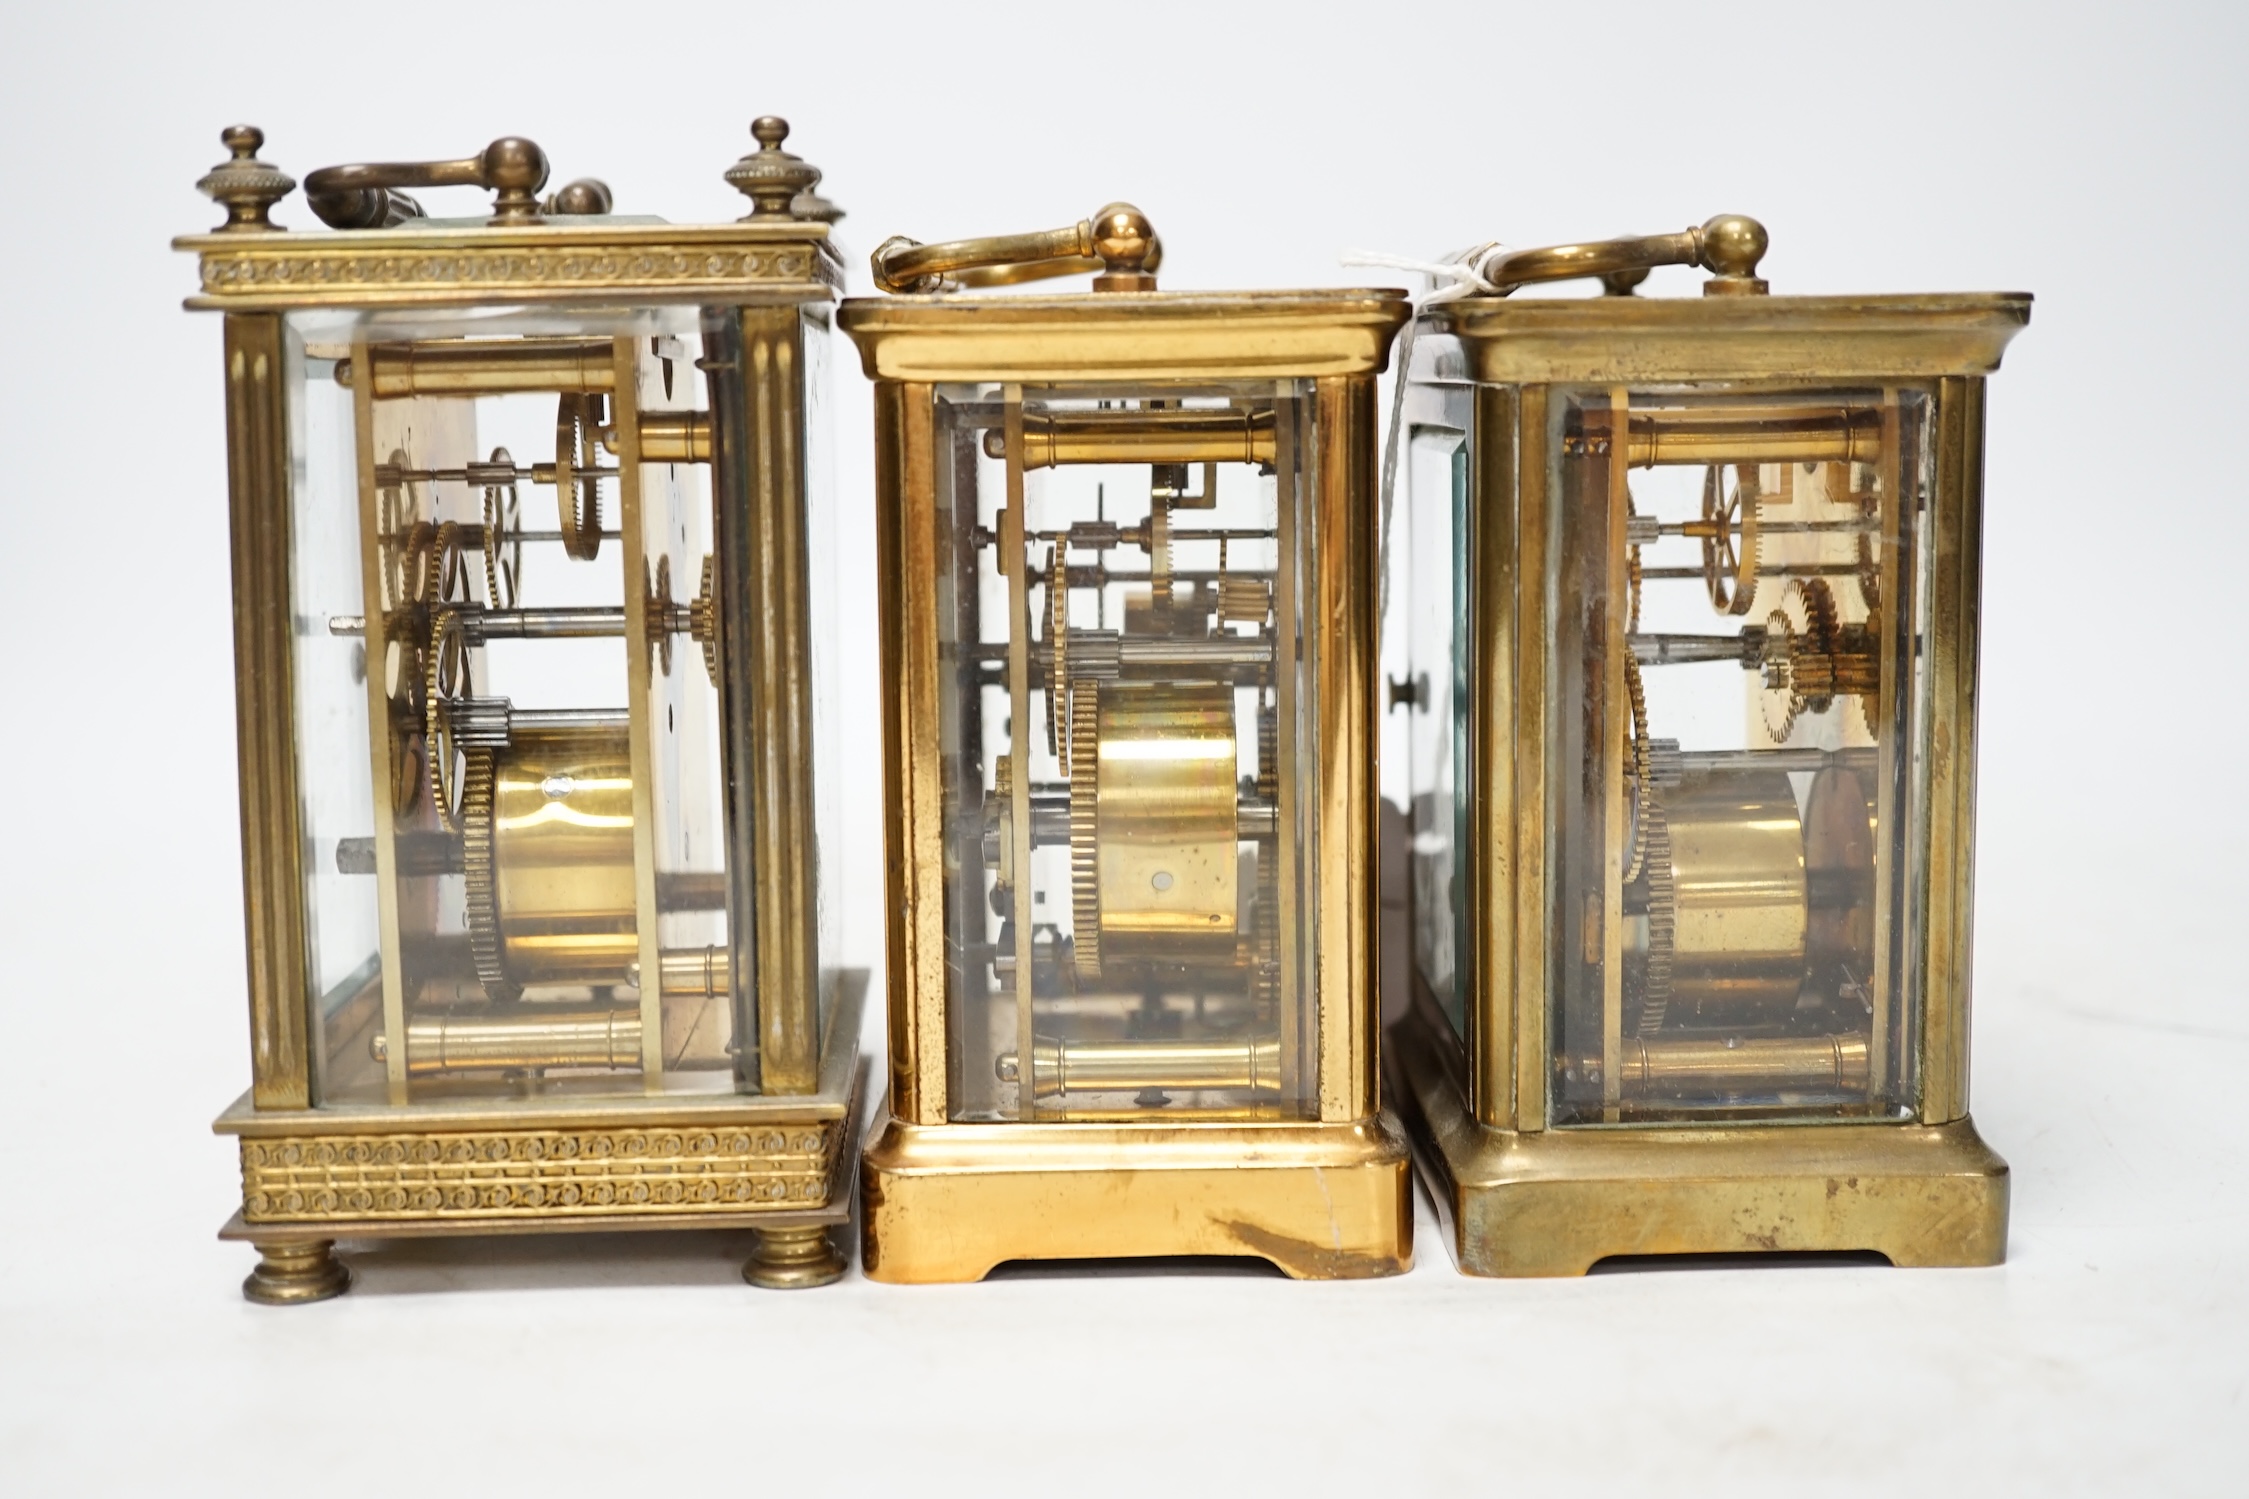 Three carriage timepieces with enamel dials, largest 14.5cm high. Condition - poor to fair